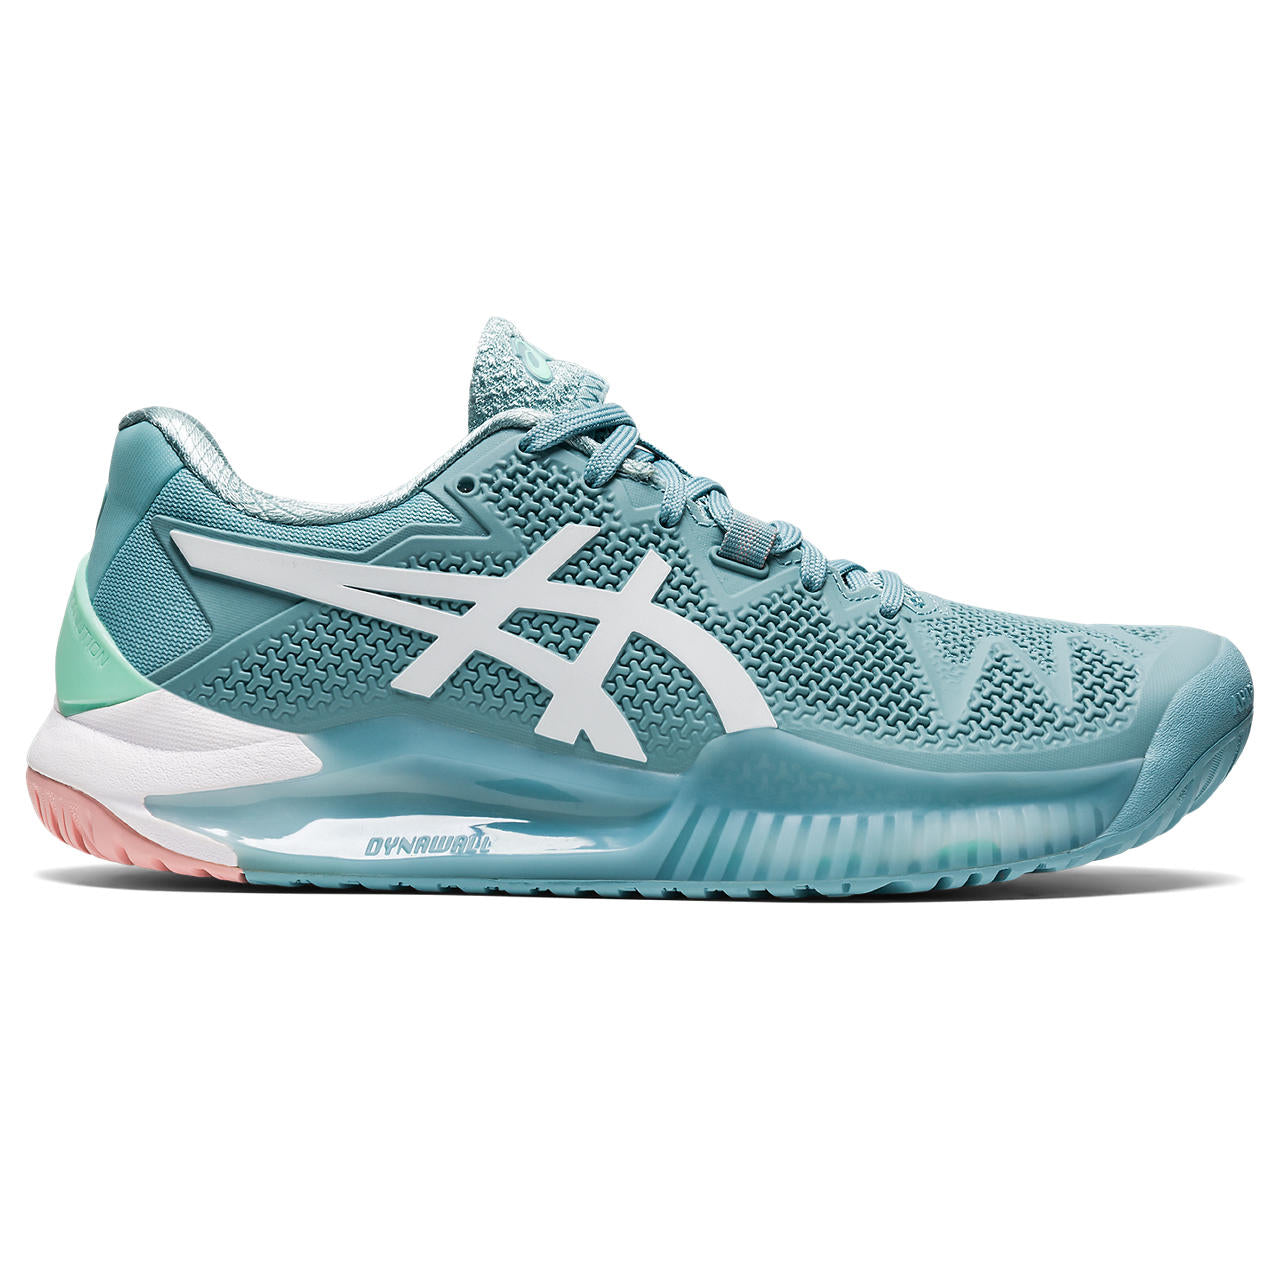 The Women's Gel-Resolution 8 tennis shoe promotes a responsive stride with a close-to-the-court feel. The Flexion Fit upper provides form-fitting support with the integration of Dynawall technology, which offers added midfoot stability during lateral movements and coast-to-coast coverage.